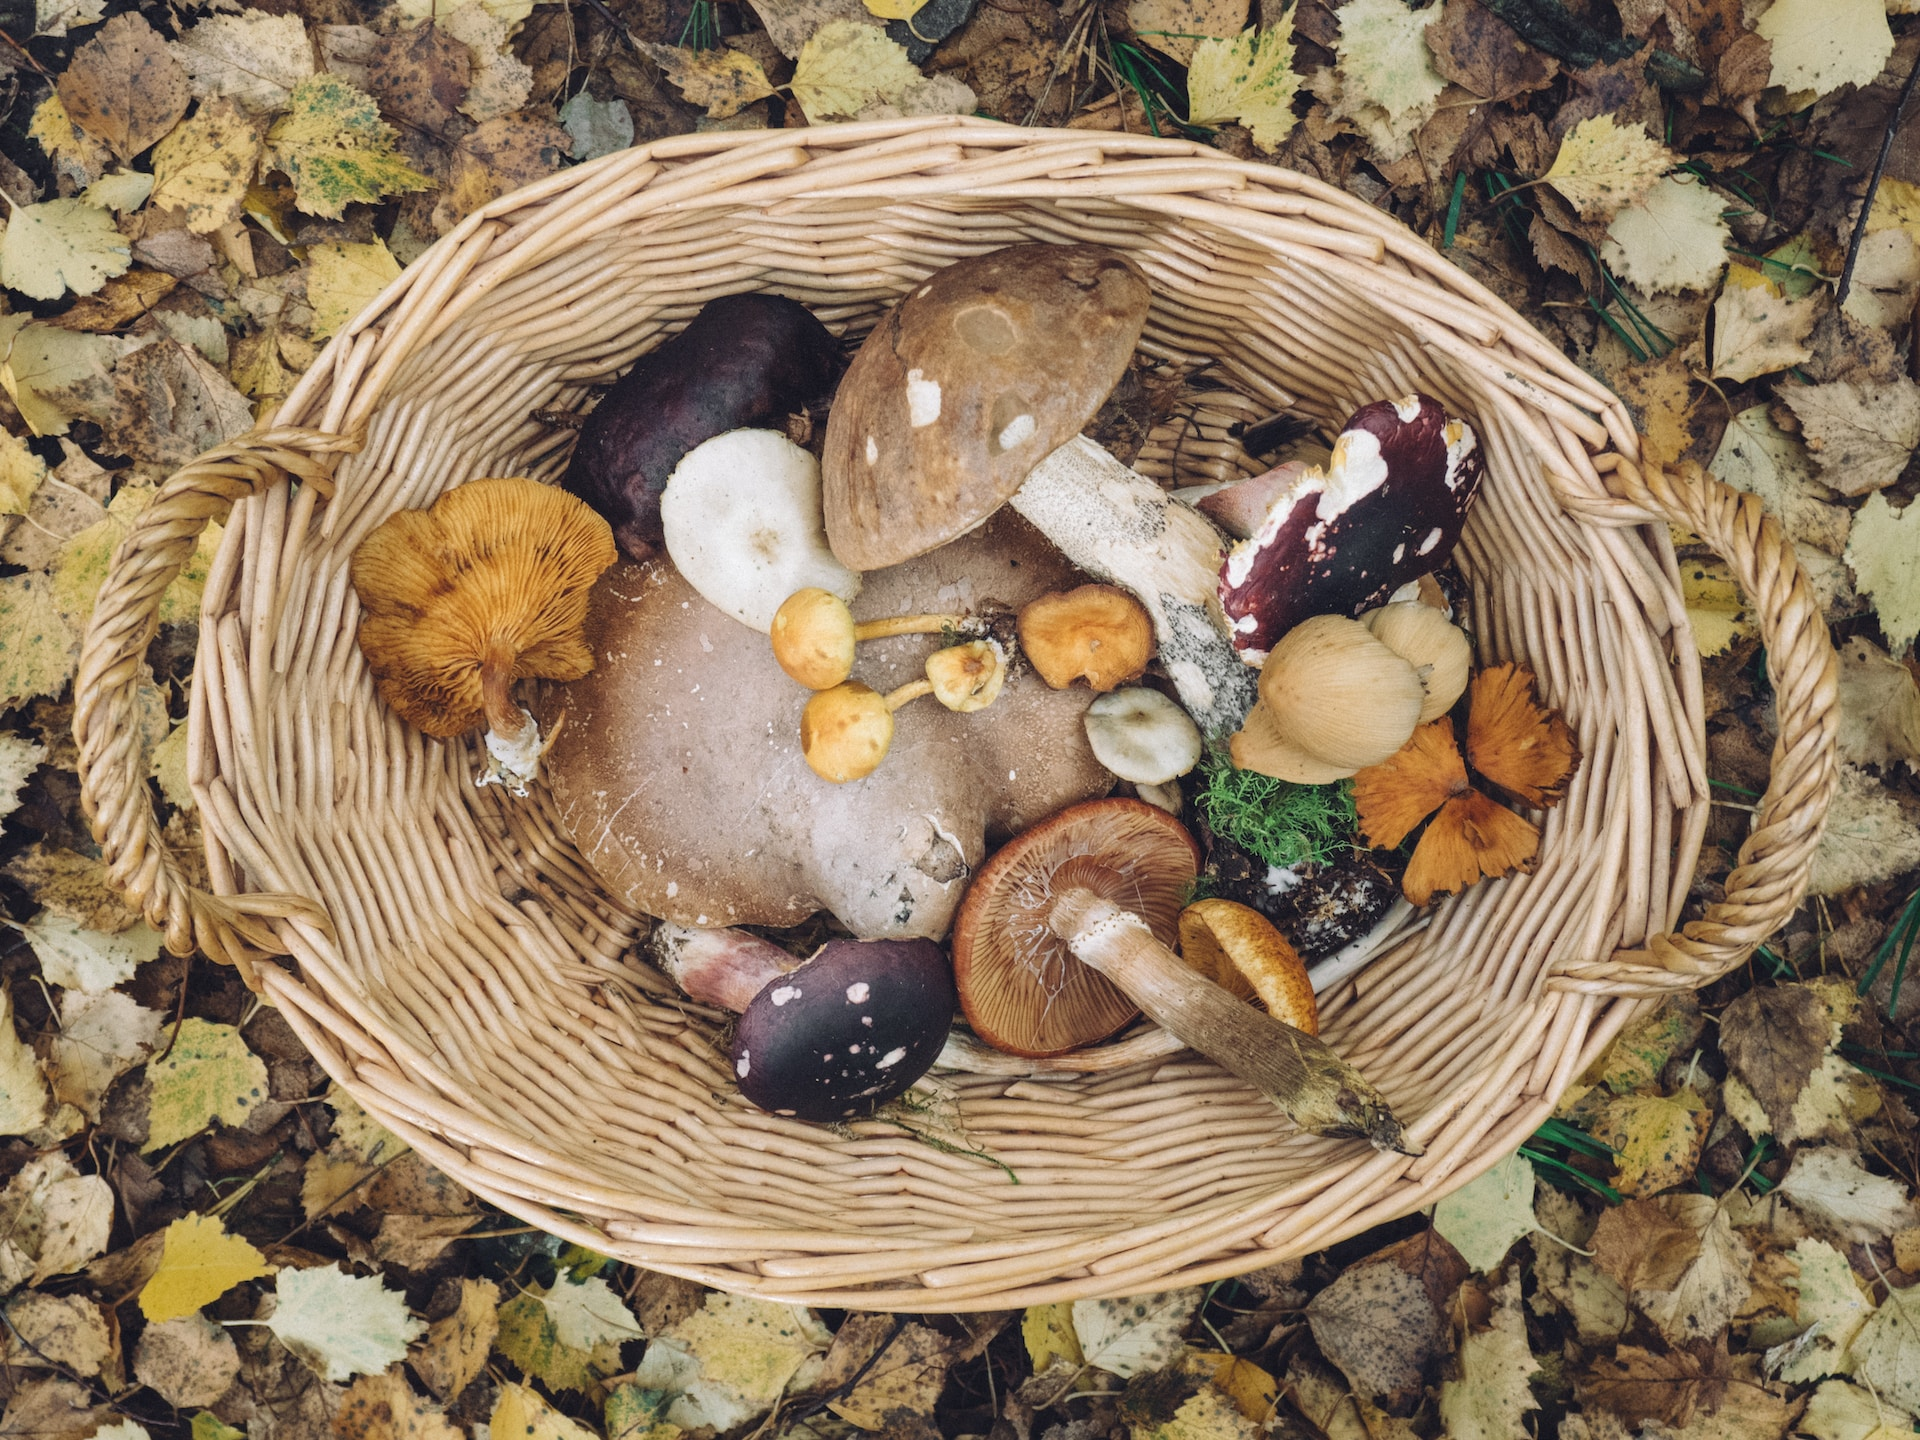 a basket filled with different types of mushrooms